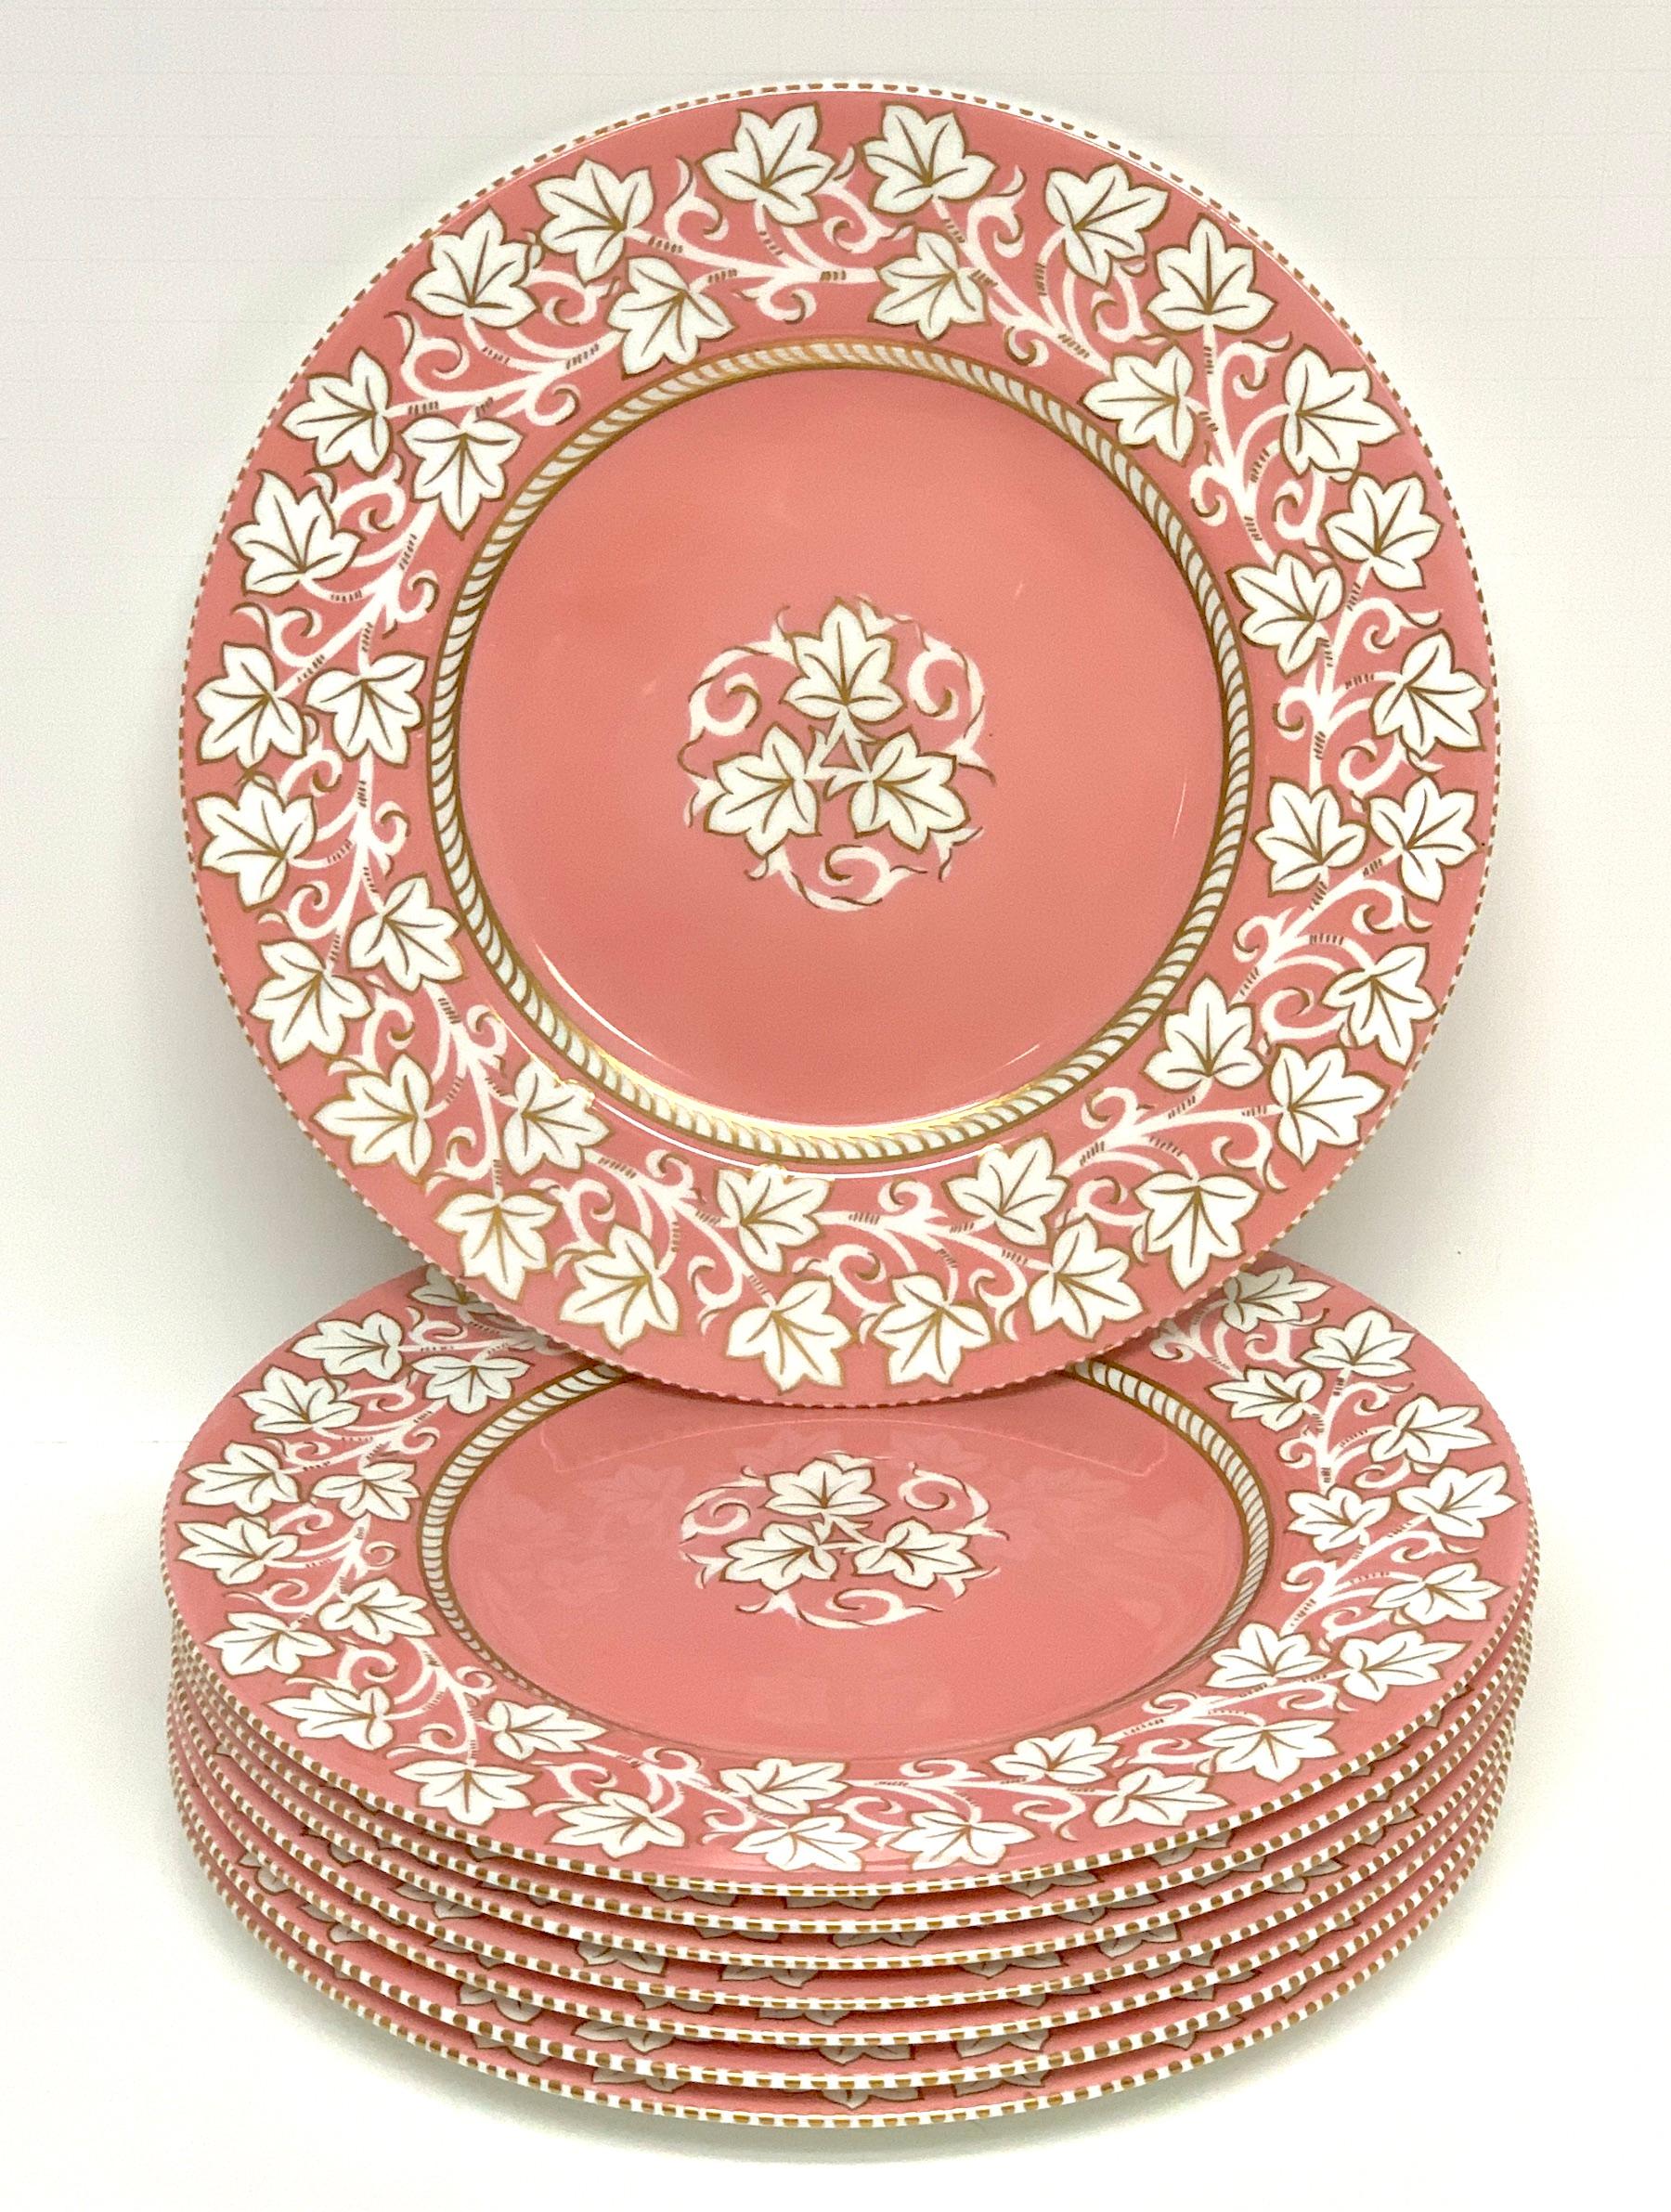 8 stunning Hollywood Regency Wedgwood pink Lustre service plates, each one vibrant pink background with continuous leaf decoration. Each one marked Wedgwood, Made in England, with painters marks.